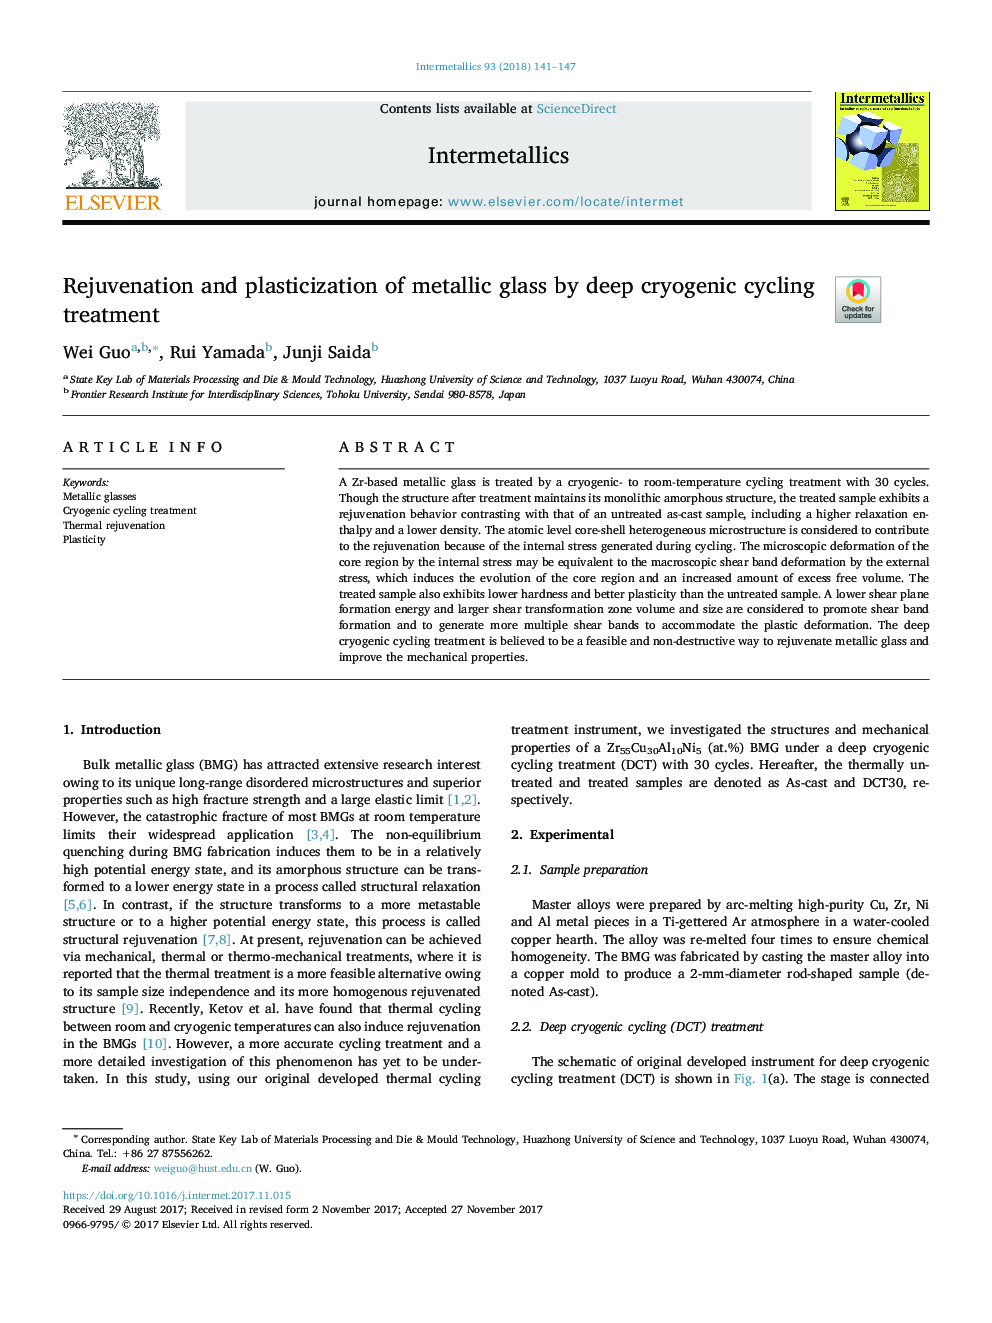 Rejuvenation and plasticization of metallic glass by deep cryogenic cycling treatment